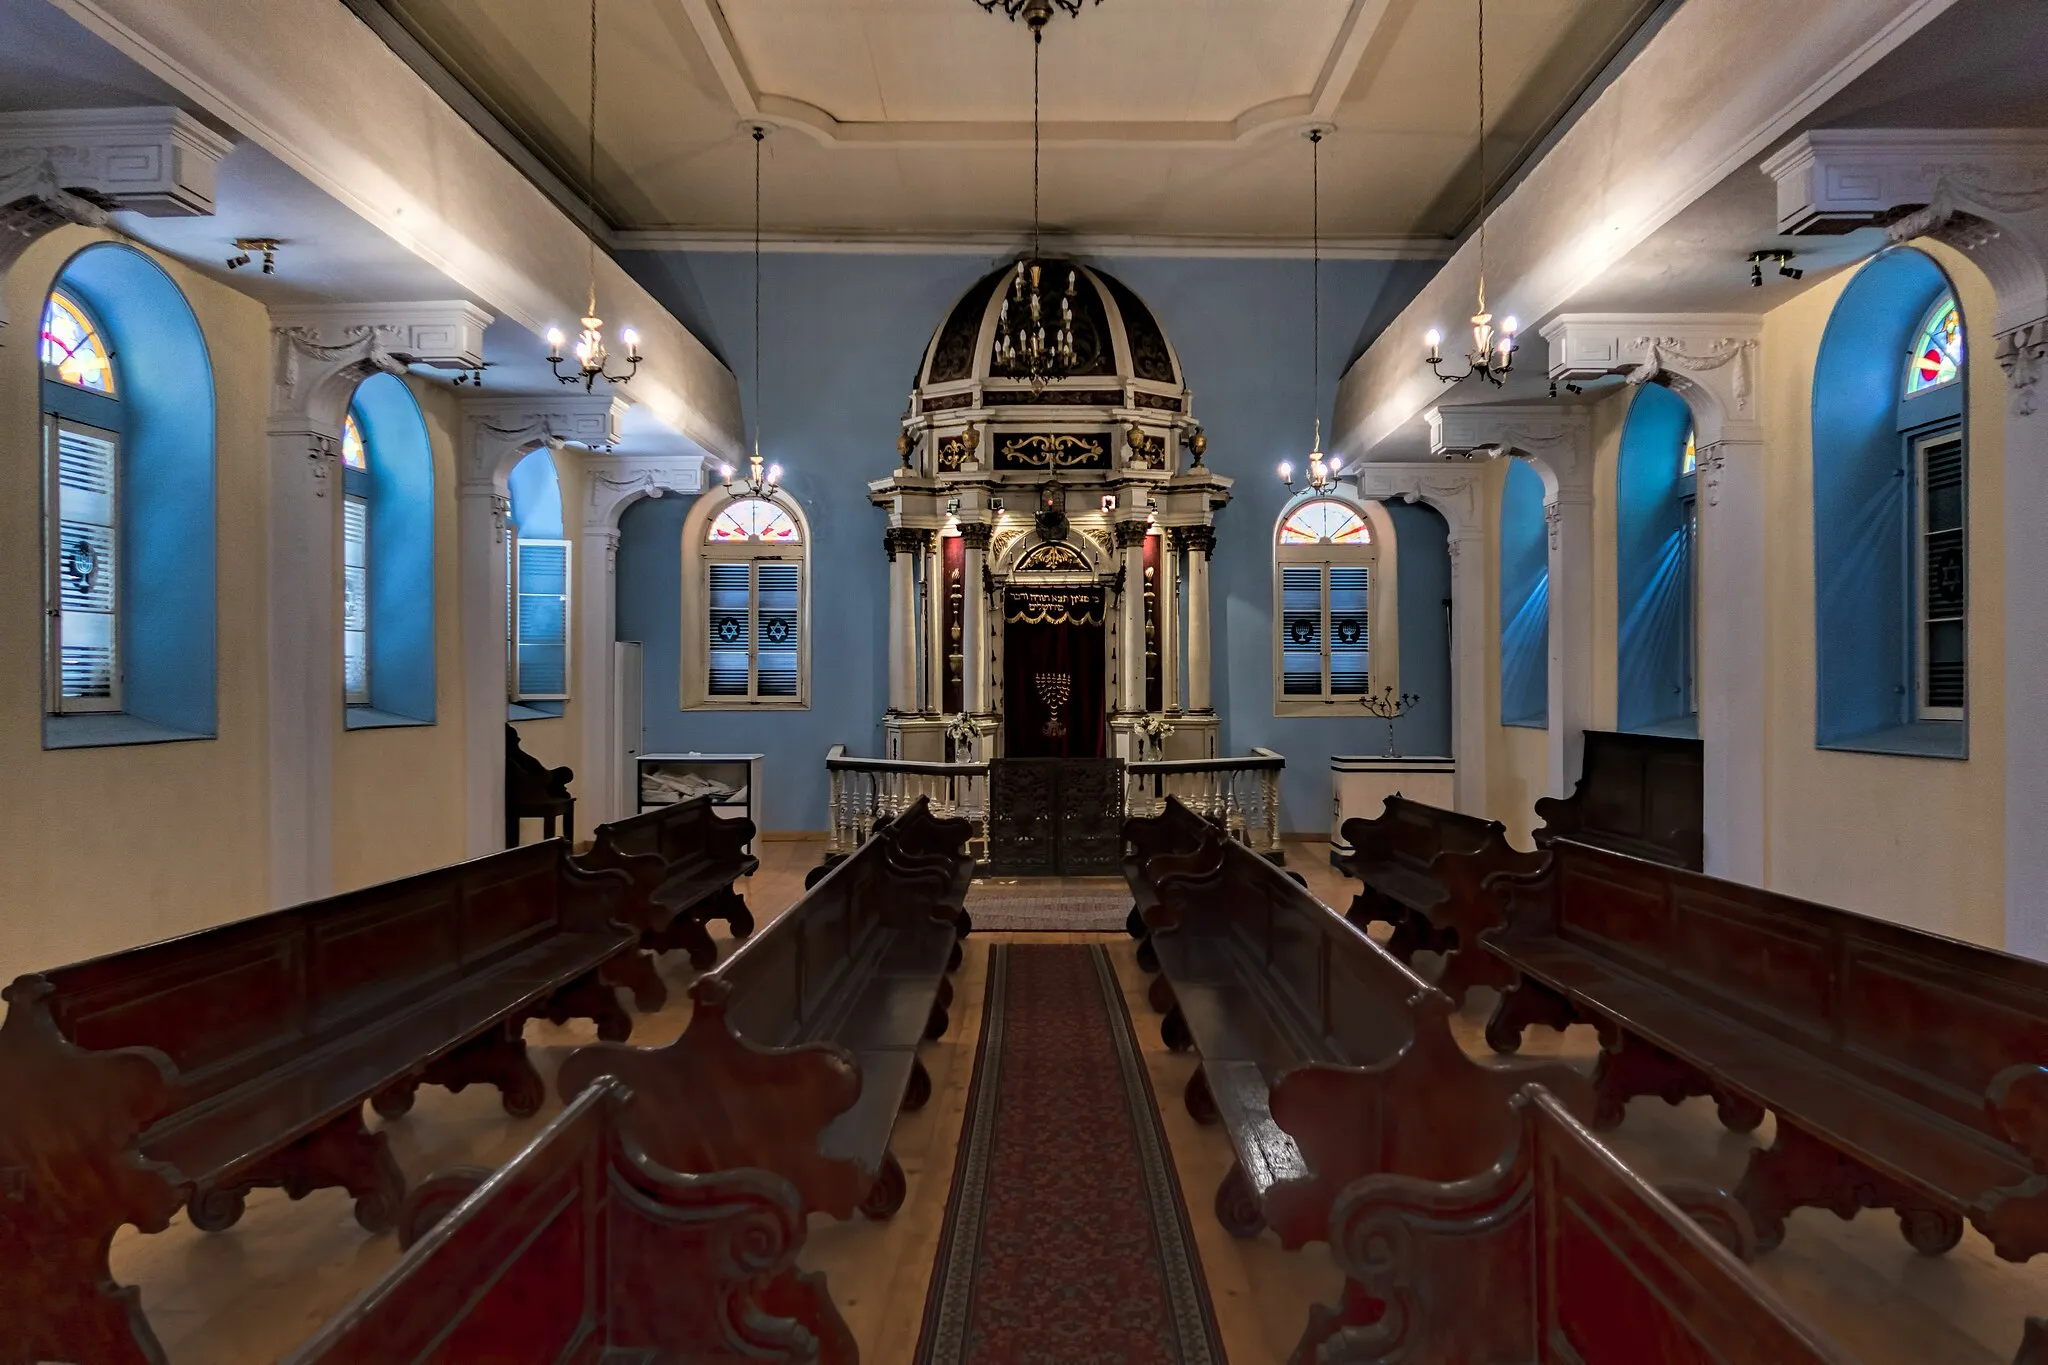 Photo showing: The ark holding the Torah at one end of the main worship space up the stairs inside the only remaining synagogue in Corfu which was built in the 17th century CE in Venetian style.  In the 19th century CE around 4,000 Jews lived in Corfu.  Today there are only about 60.
The island of Corfu—known as Kerkyra in Greek—is strategically located at the entrance to the Adriatic Sea.  Regularly fought over, the Romans gained control in the 3rd century BCE, continuing with the Byzantine Empire (eastern portion of the divided Roman Empire) from the 4th century CE.  In 1386 CE the Venetians took over.  They held off multiple attacks from the Ottoman Turks.  In 1797 CE Napoleon Bonaparte secretly negotiated the end of the Republic of Venice bringing Corfu under French rule.  All the Ionian Islands became a British protectorate in 1815 CE until being ceded to Greece in 1864 CE.
The Old Town of Corfu was designated a UNESCO World Heritage site in 2007.
On Google Earth:

Scuola Greca (Greek Temple) Synagogue  39°37'23.10"N, 19°55'11.92"E